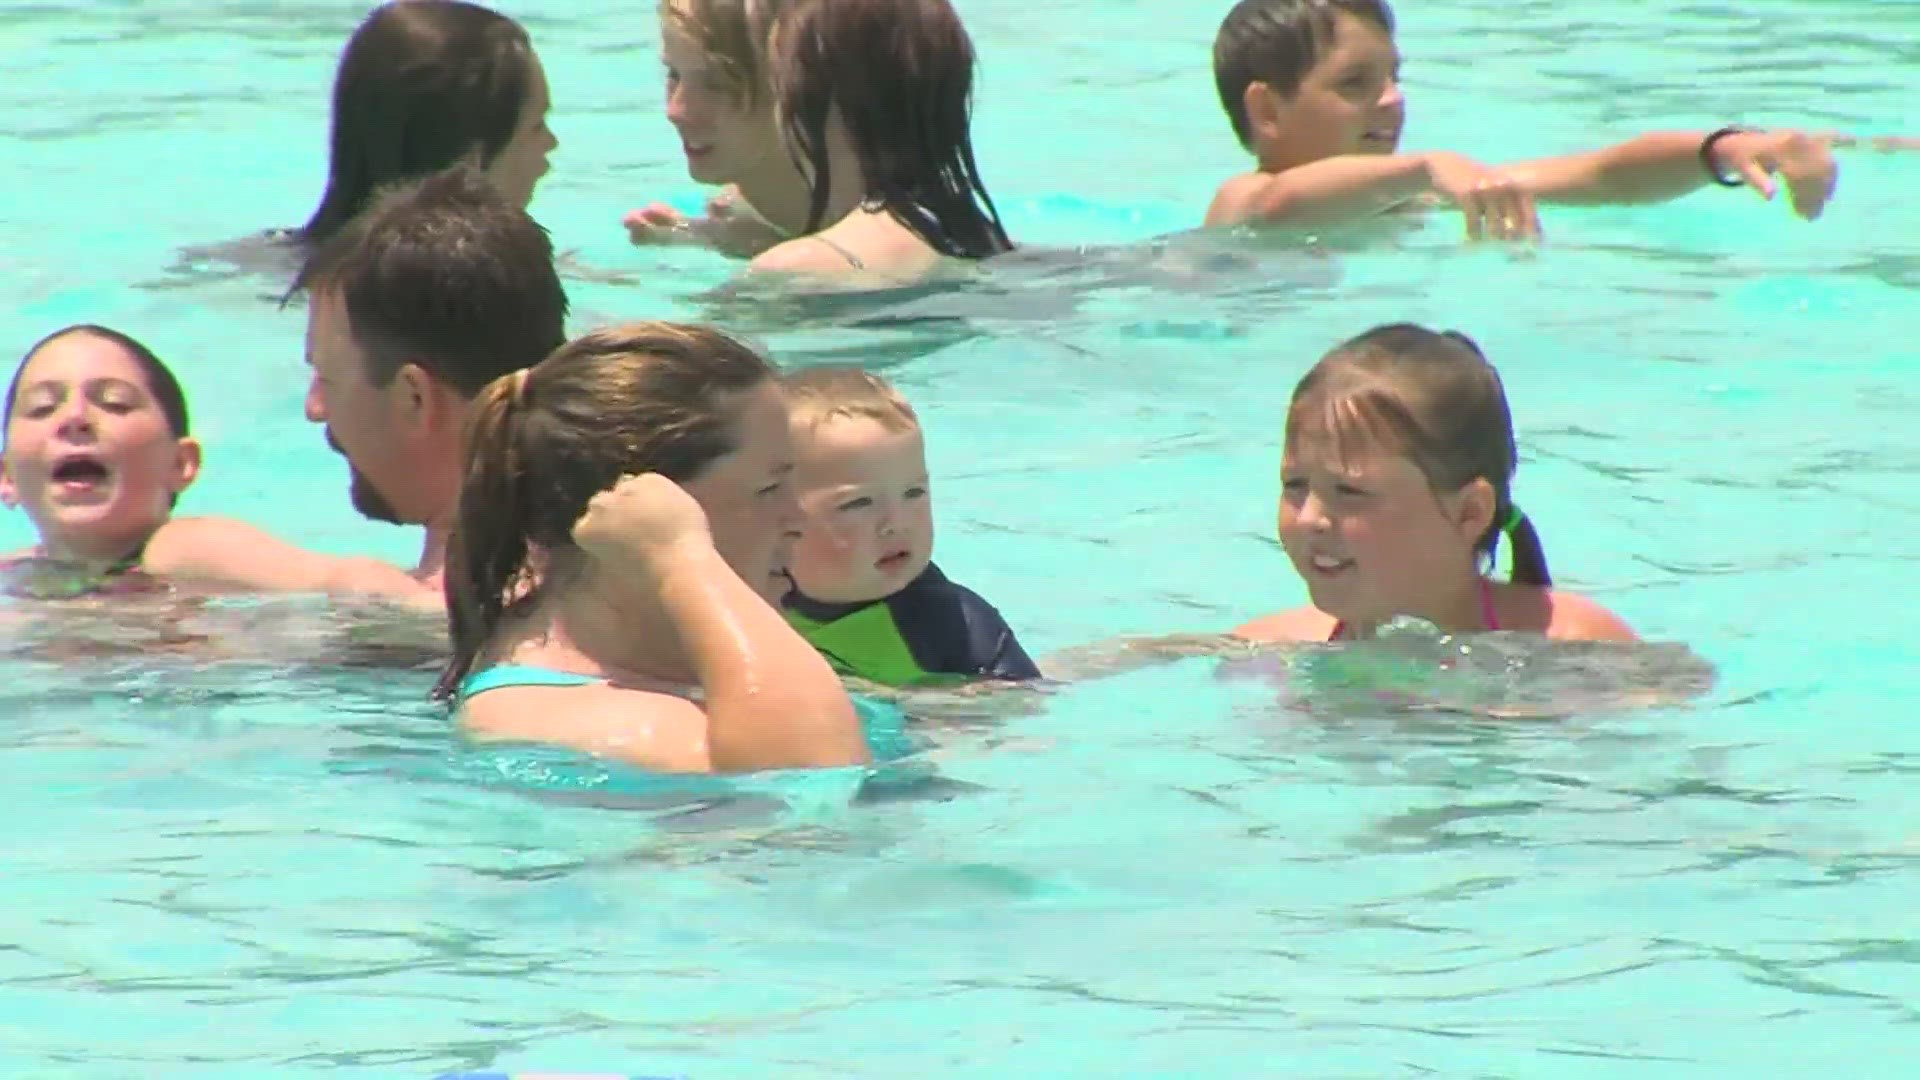 According to the Texas Department of Family and Protective Services, 90 children in Texas drowned in 2023. It's the leading cause of death for children under 5.